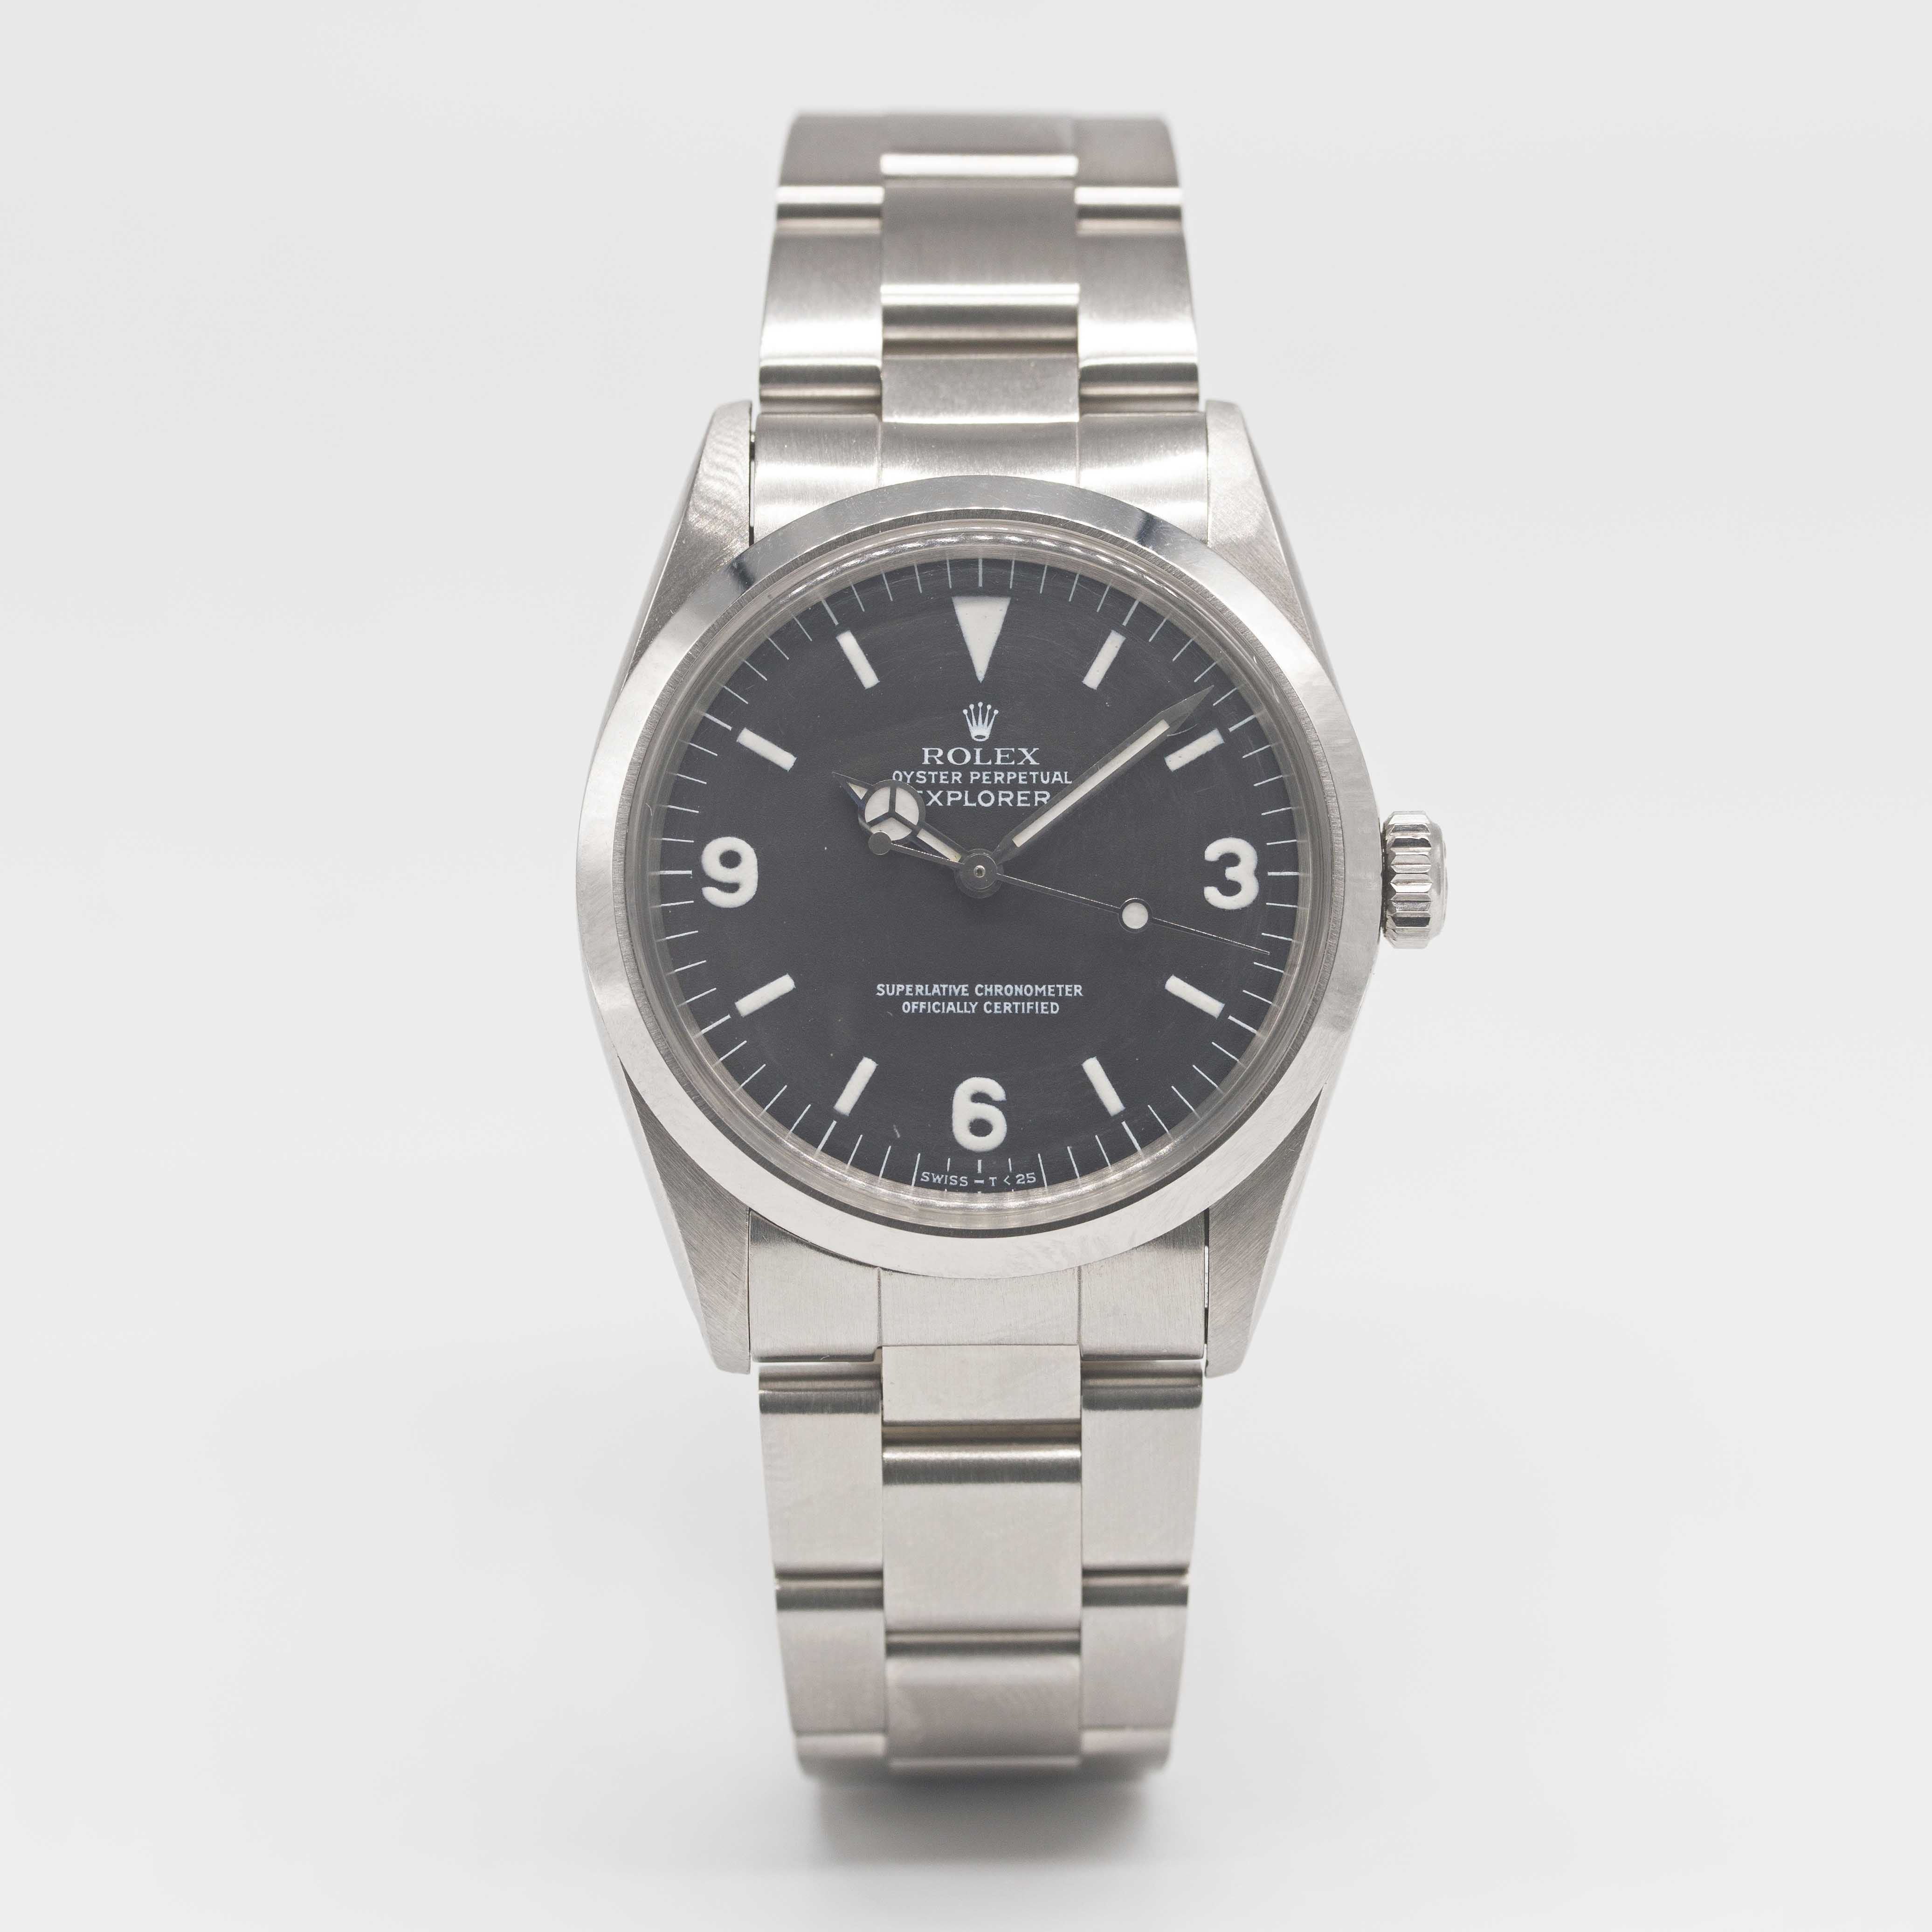 A GENTLEMAN'S STAINLESS STEEL ROLEX OYSTER PERPETUAL EXPLORER BRACELET WATCH CIRCA 1969, REF. 1016 - Image 3 of 11